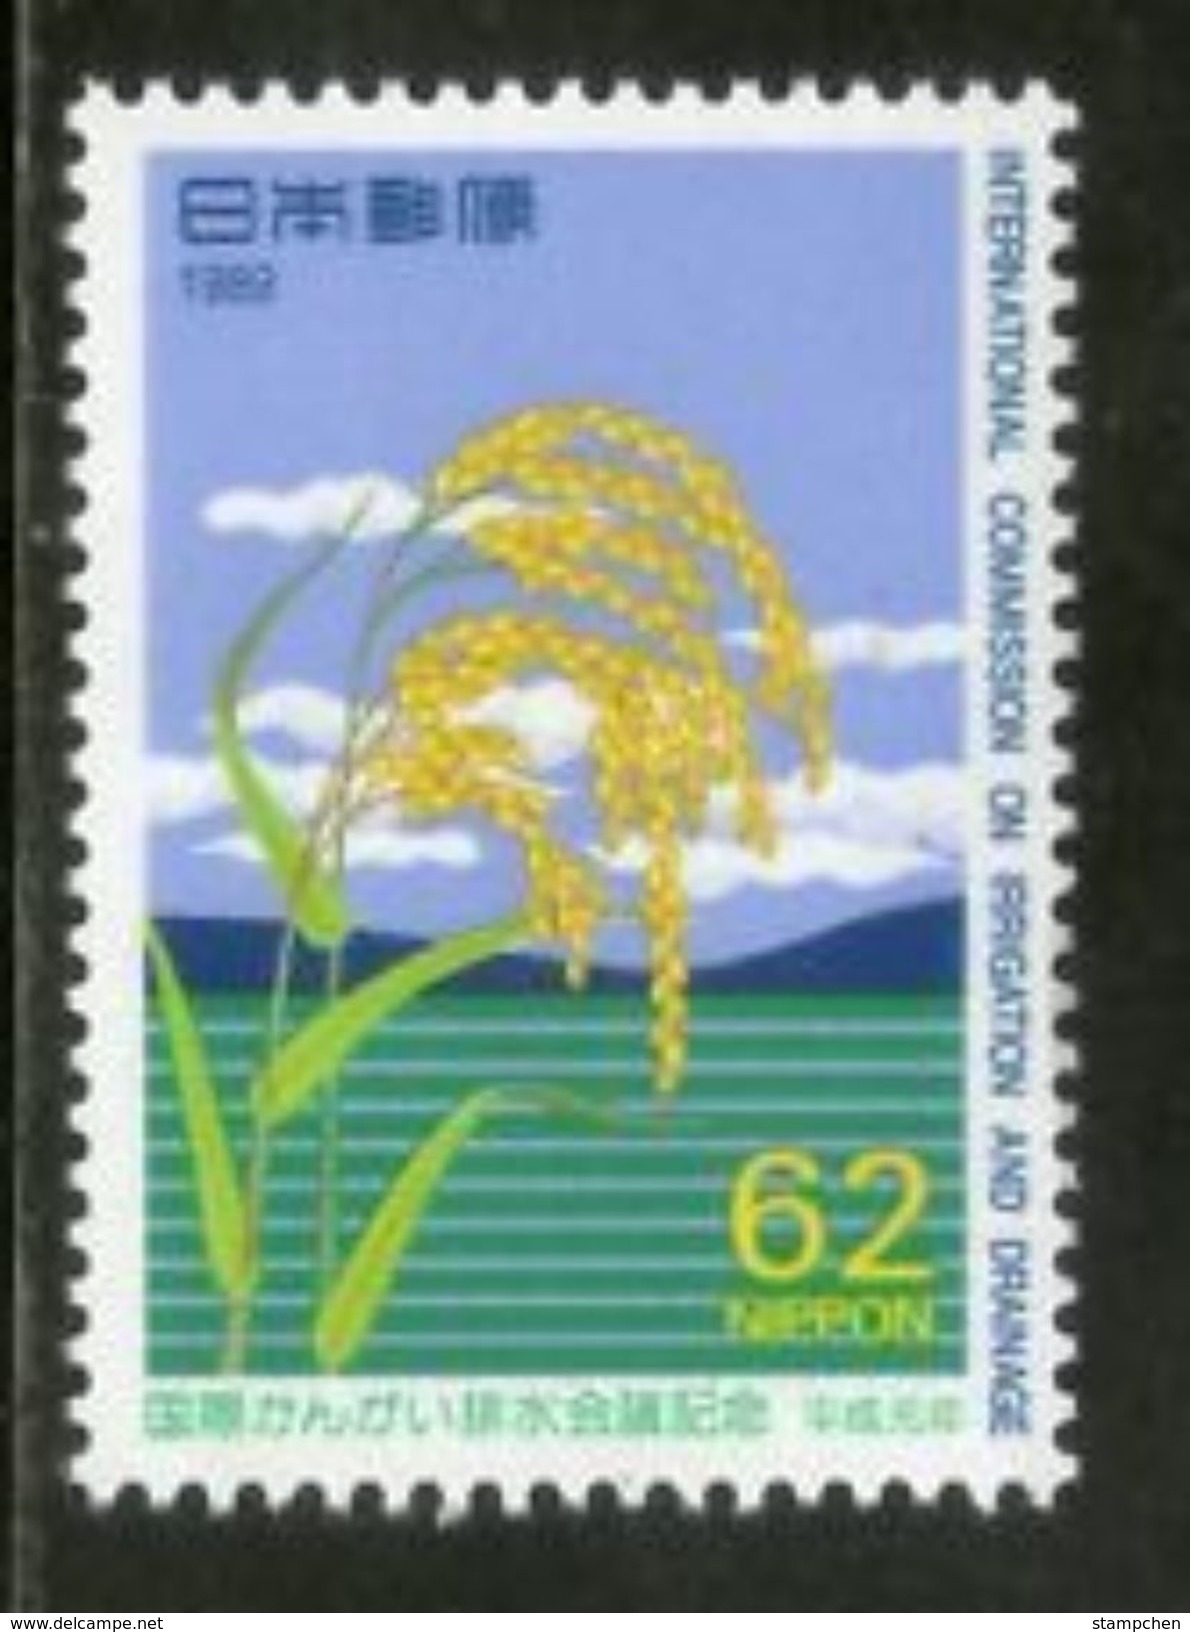 Japan 1989 Irrigation & Drainage Conference Stamp Rice Farm Cloud - Agriculture